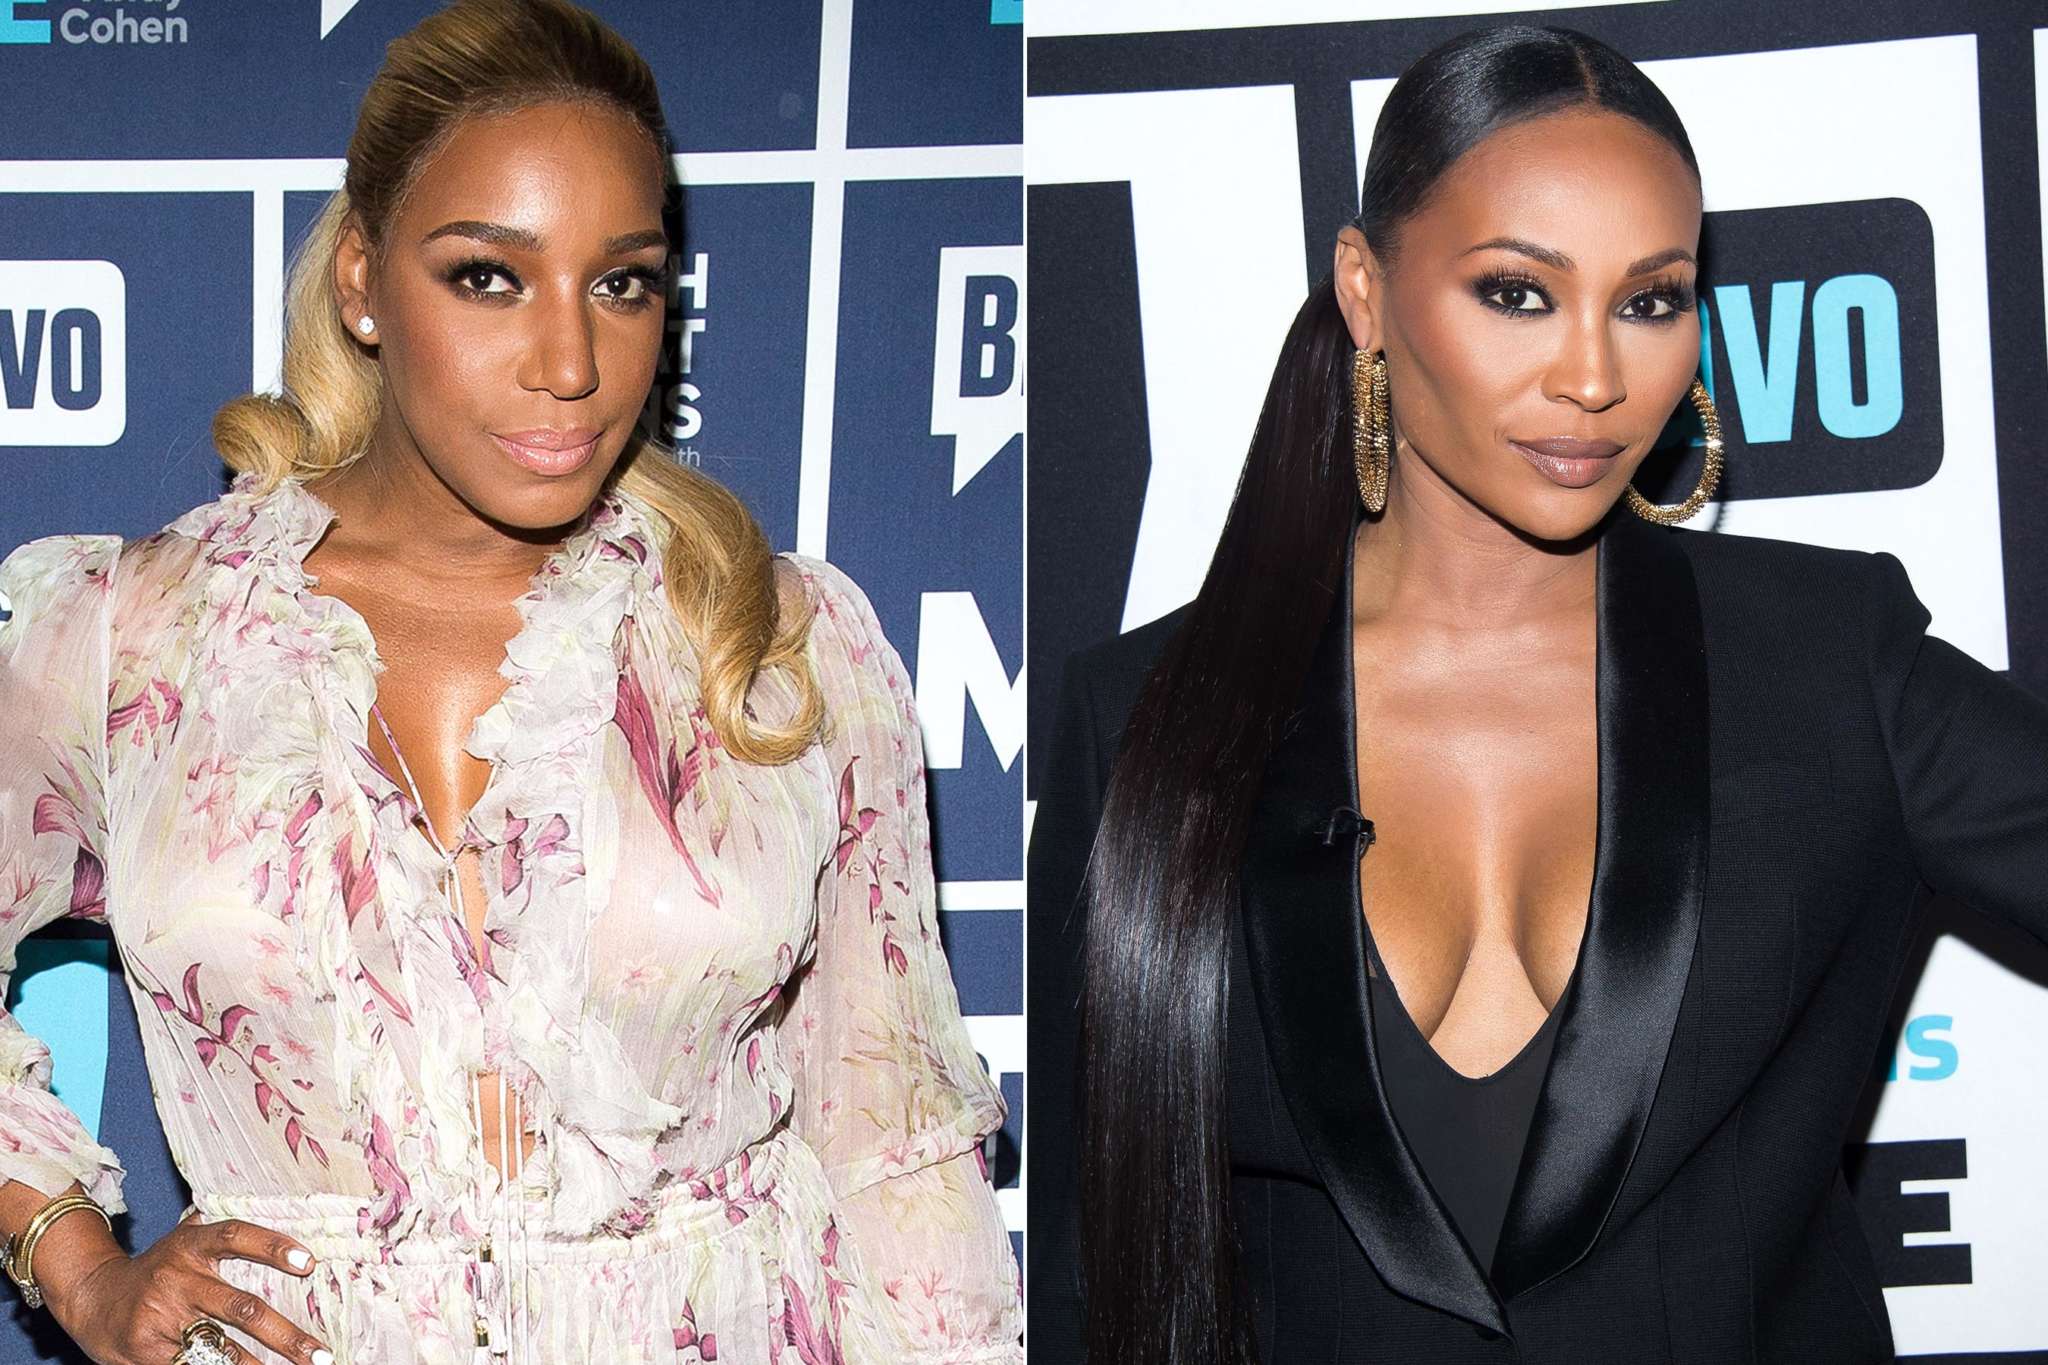 Cynthia Bailey Reveals Her Feelings About Filming RHOA With NeNe Leakes